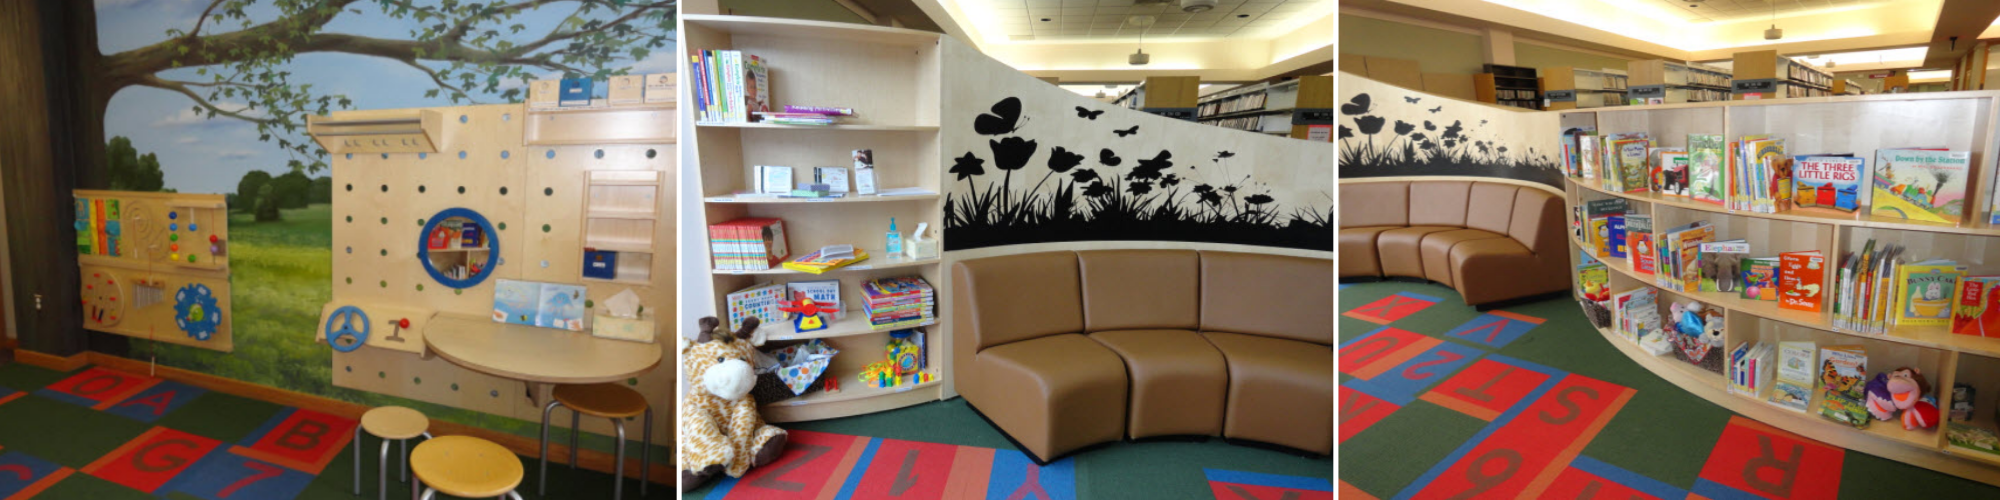 photos of the early literacy center